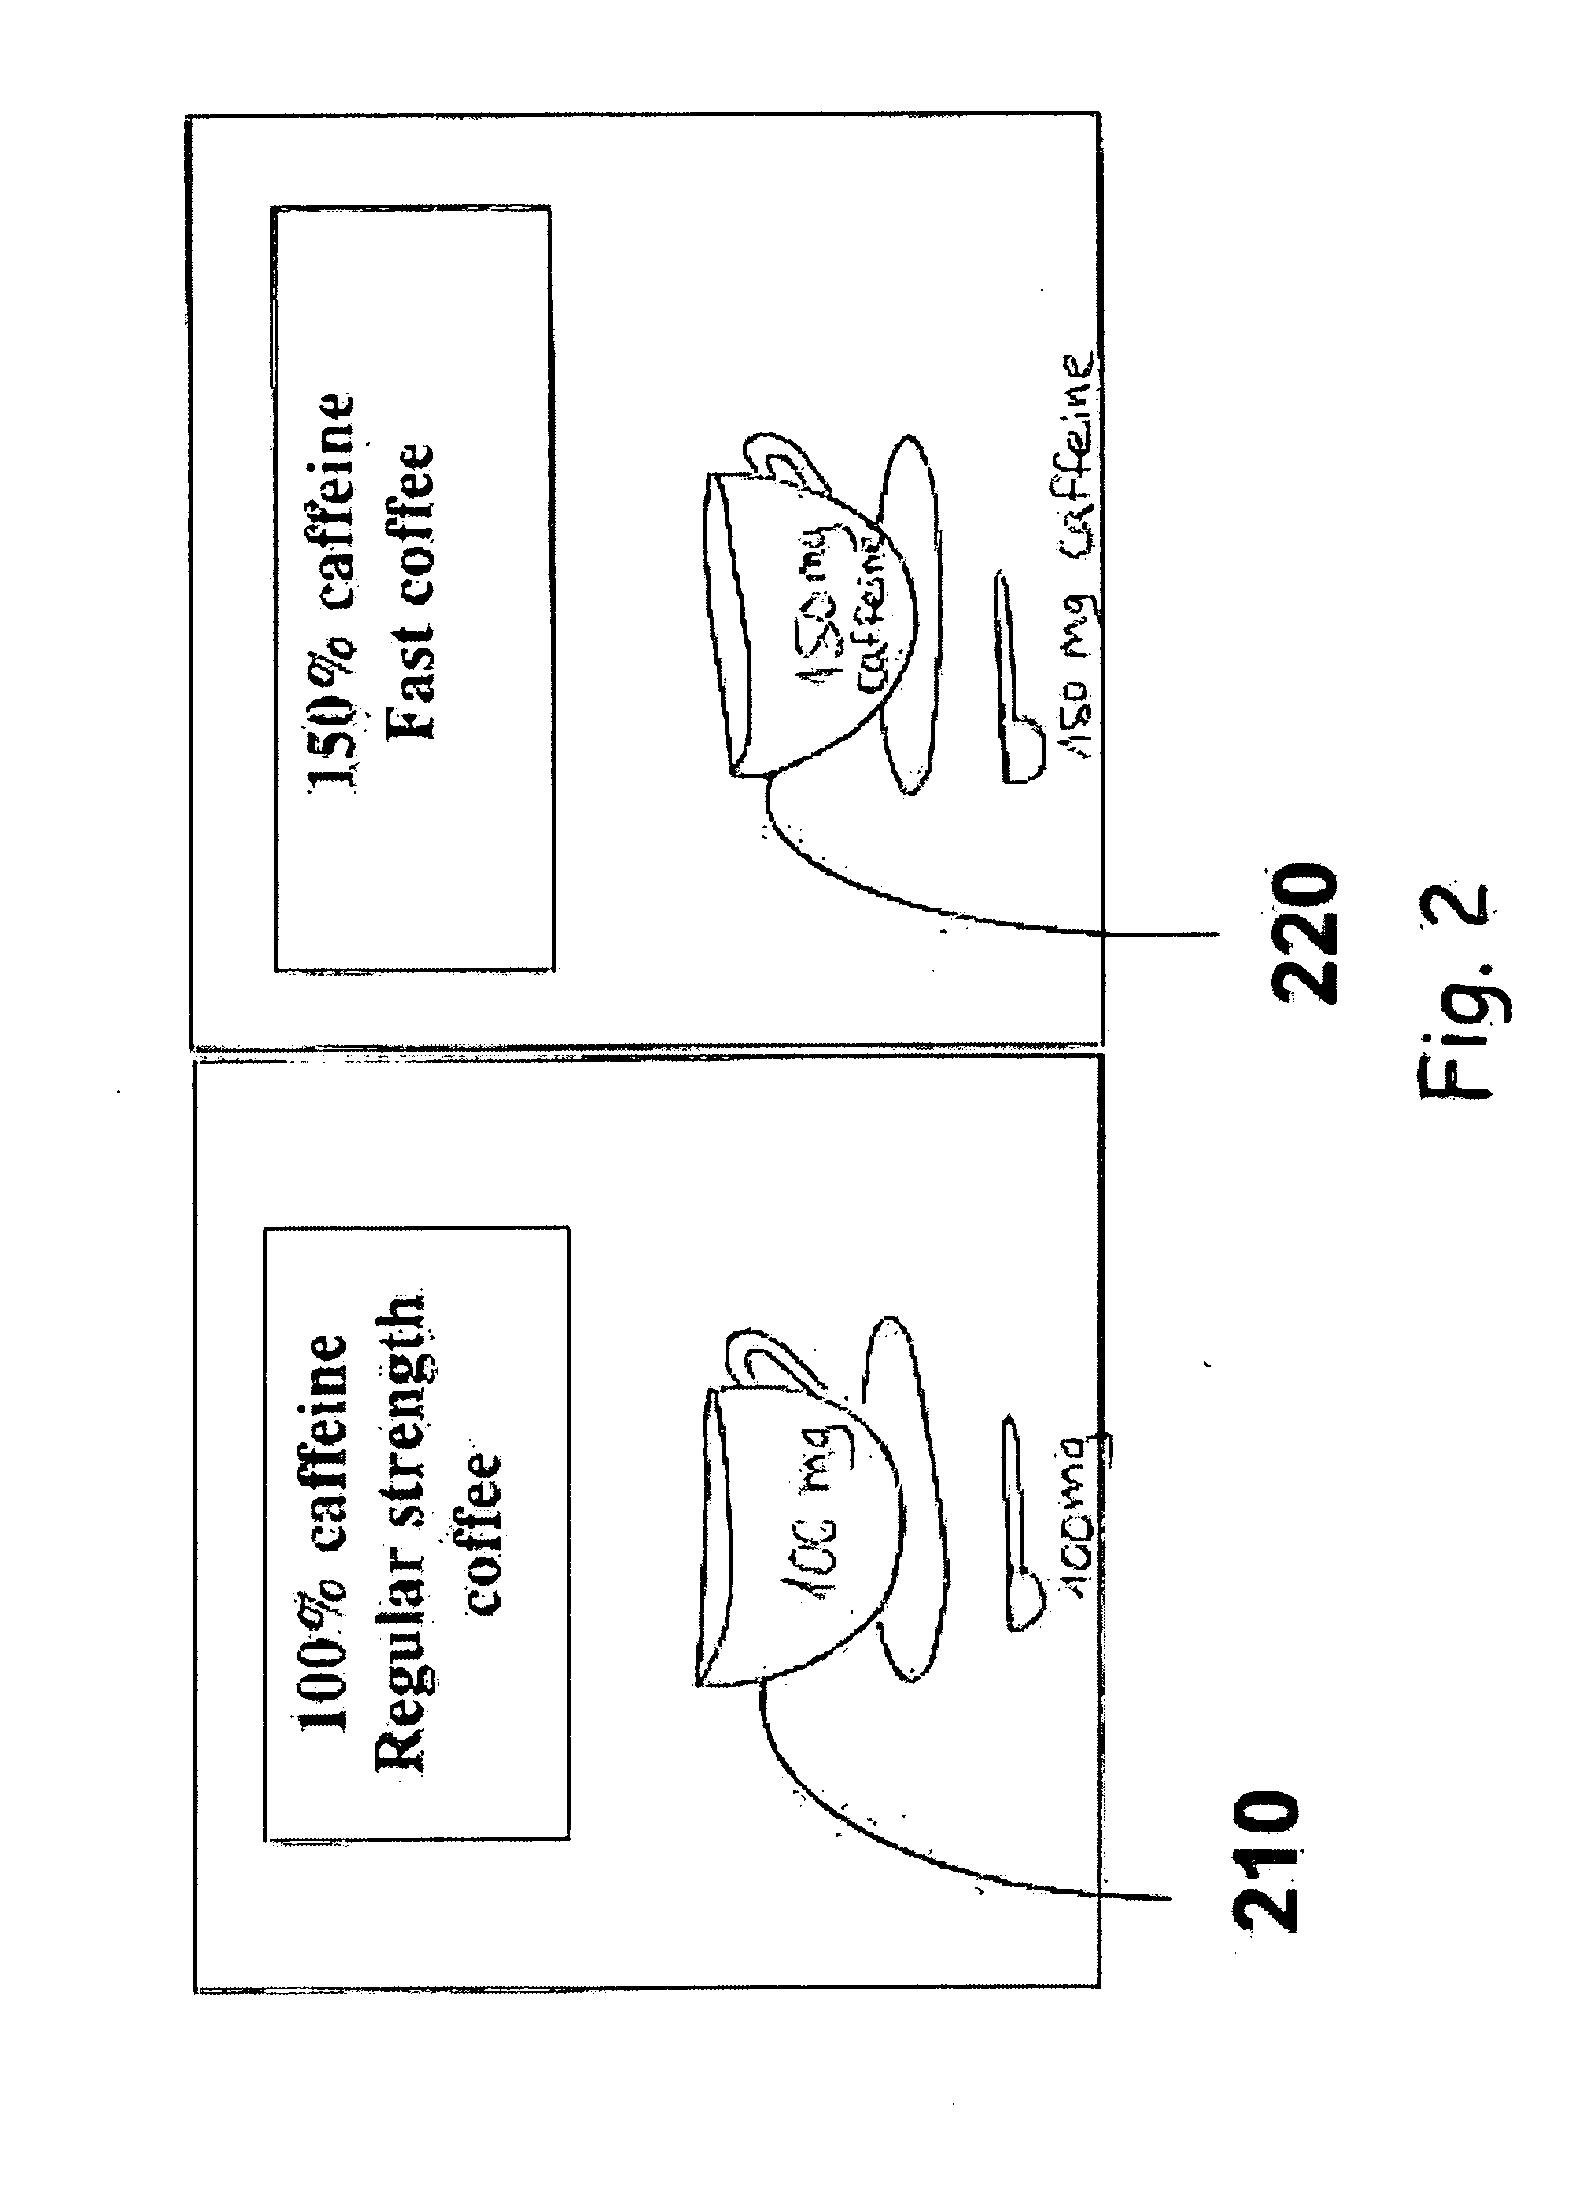 System and method for control of caffeine preparation and use